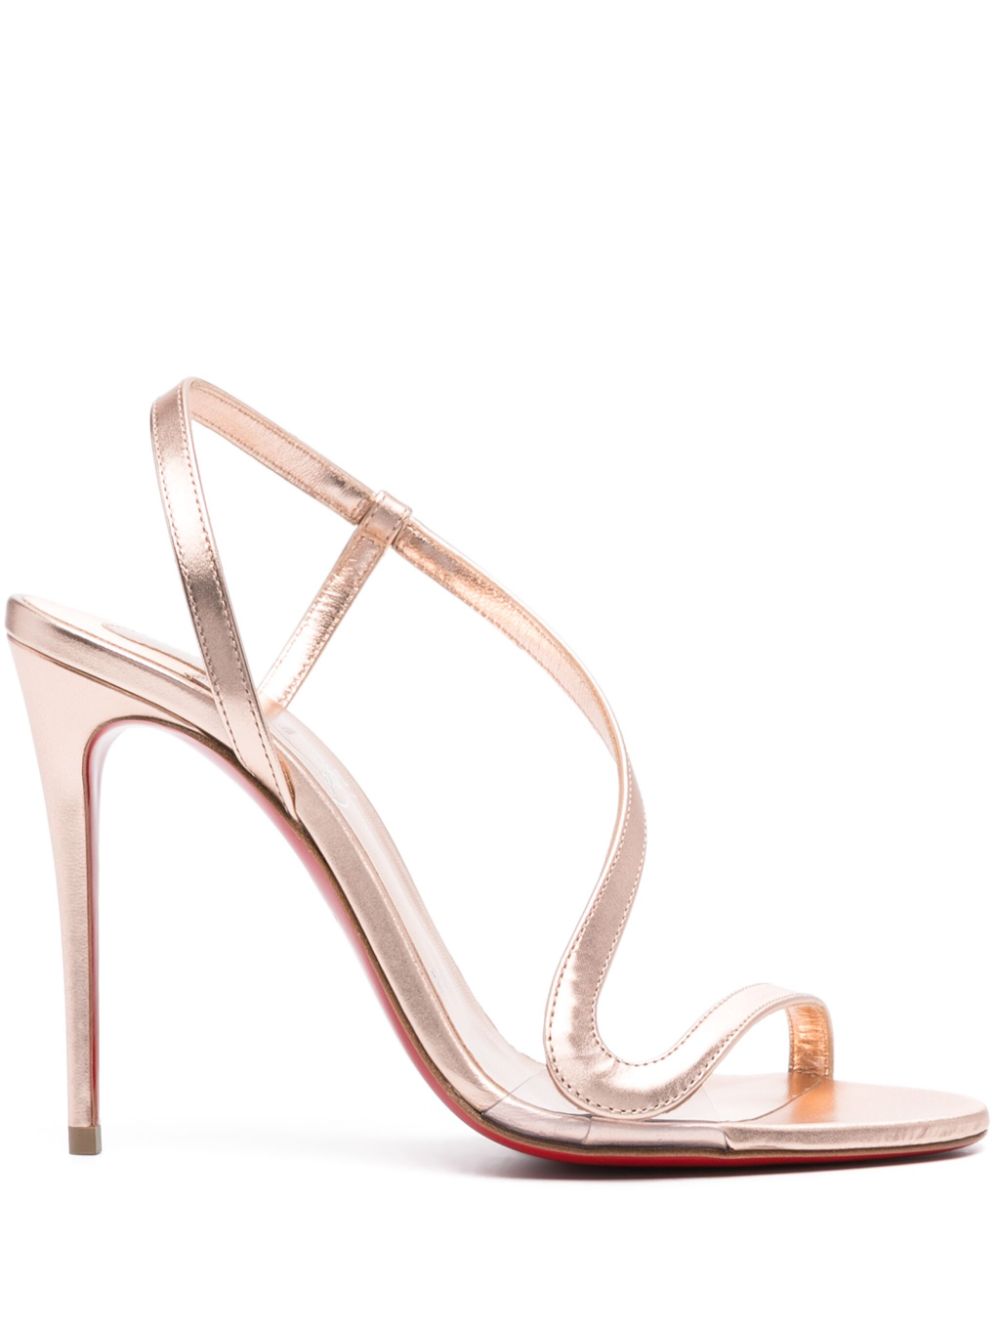 Salmon Pink Leather Sandals with 100mm Stiletto Heel